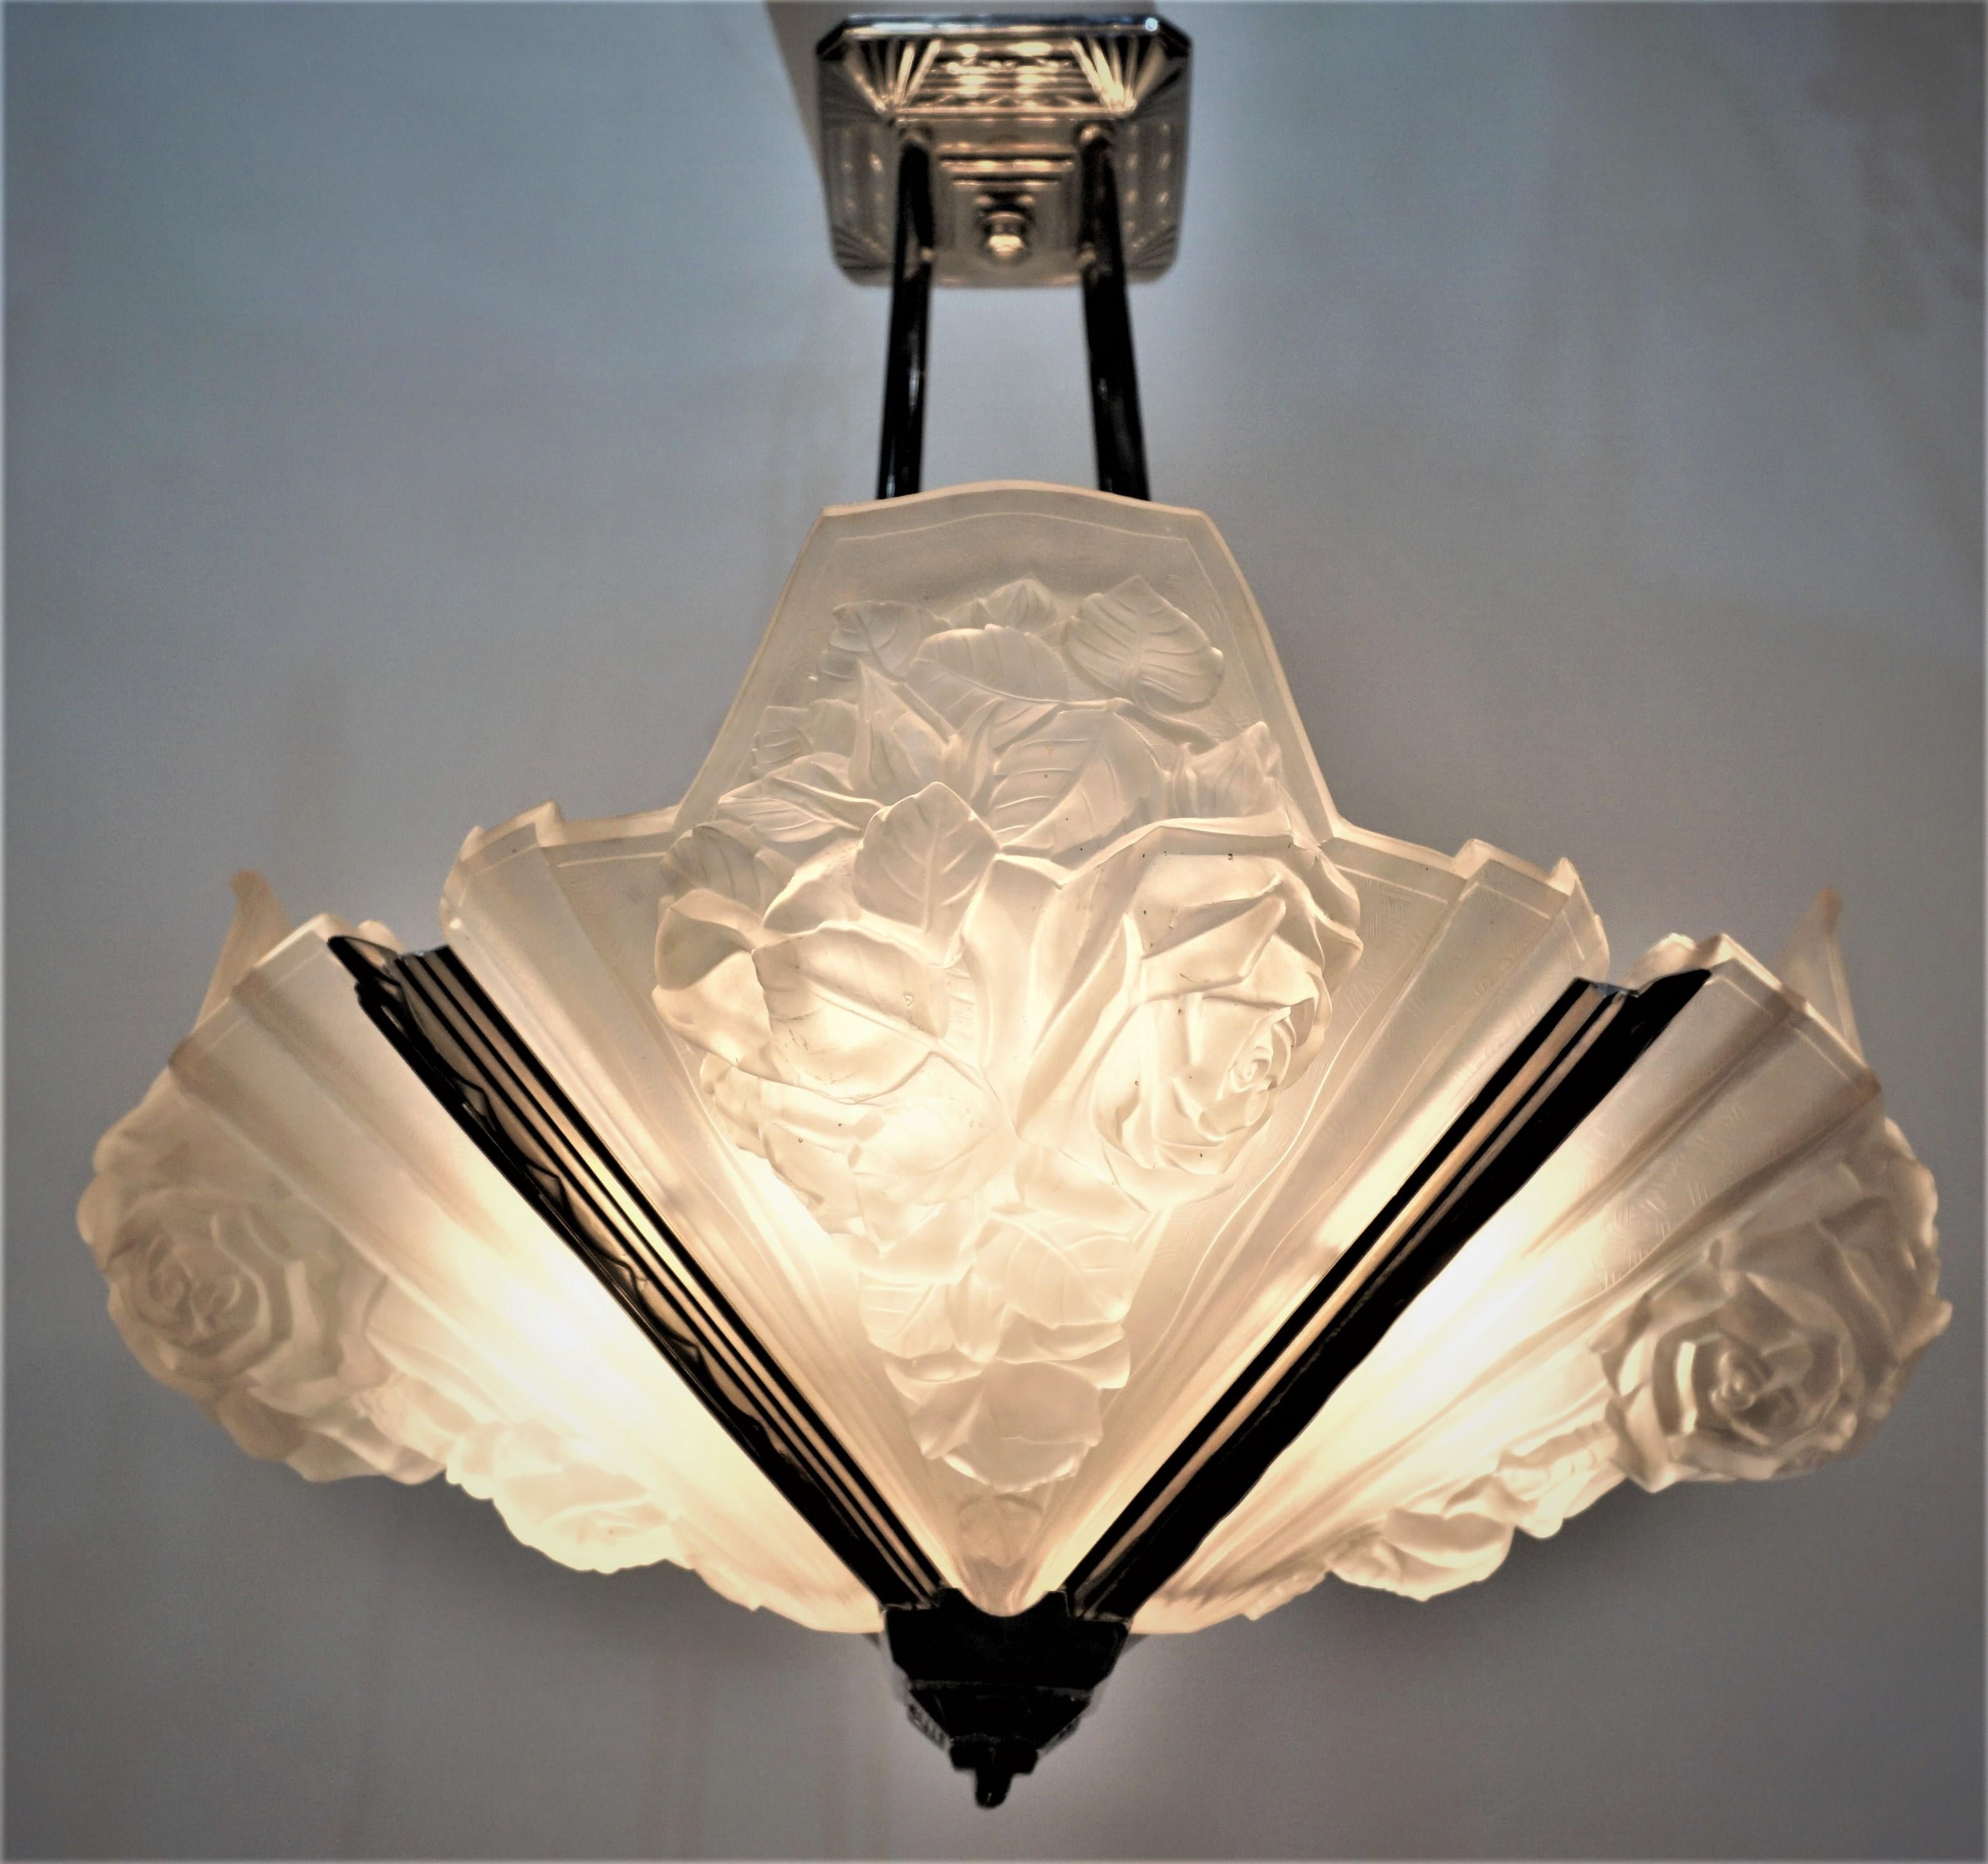 French Art Deco chandelier with four large clear frost glass and nickel on bronze frame.
Professionally rewired with eight lights, 60watts max each.